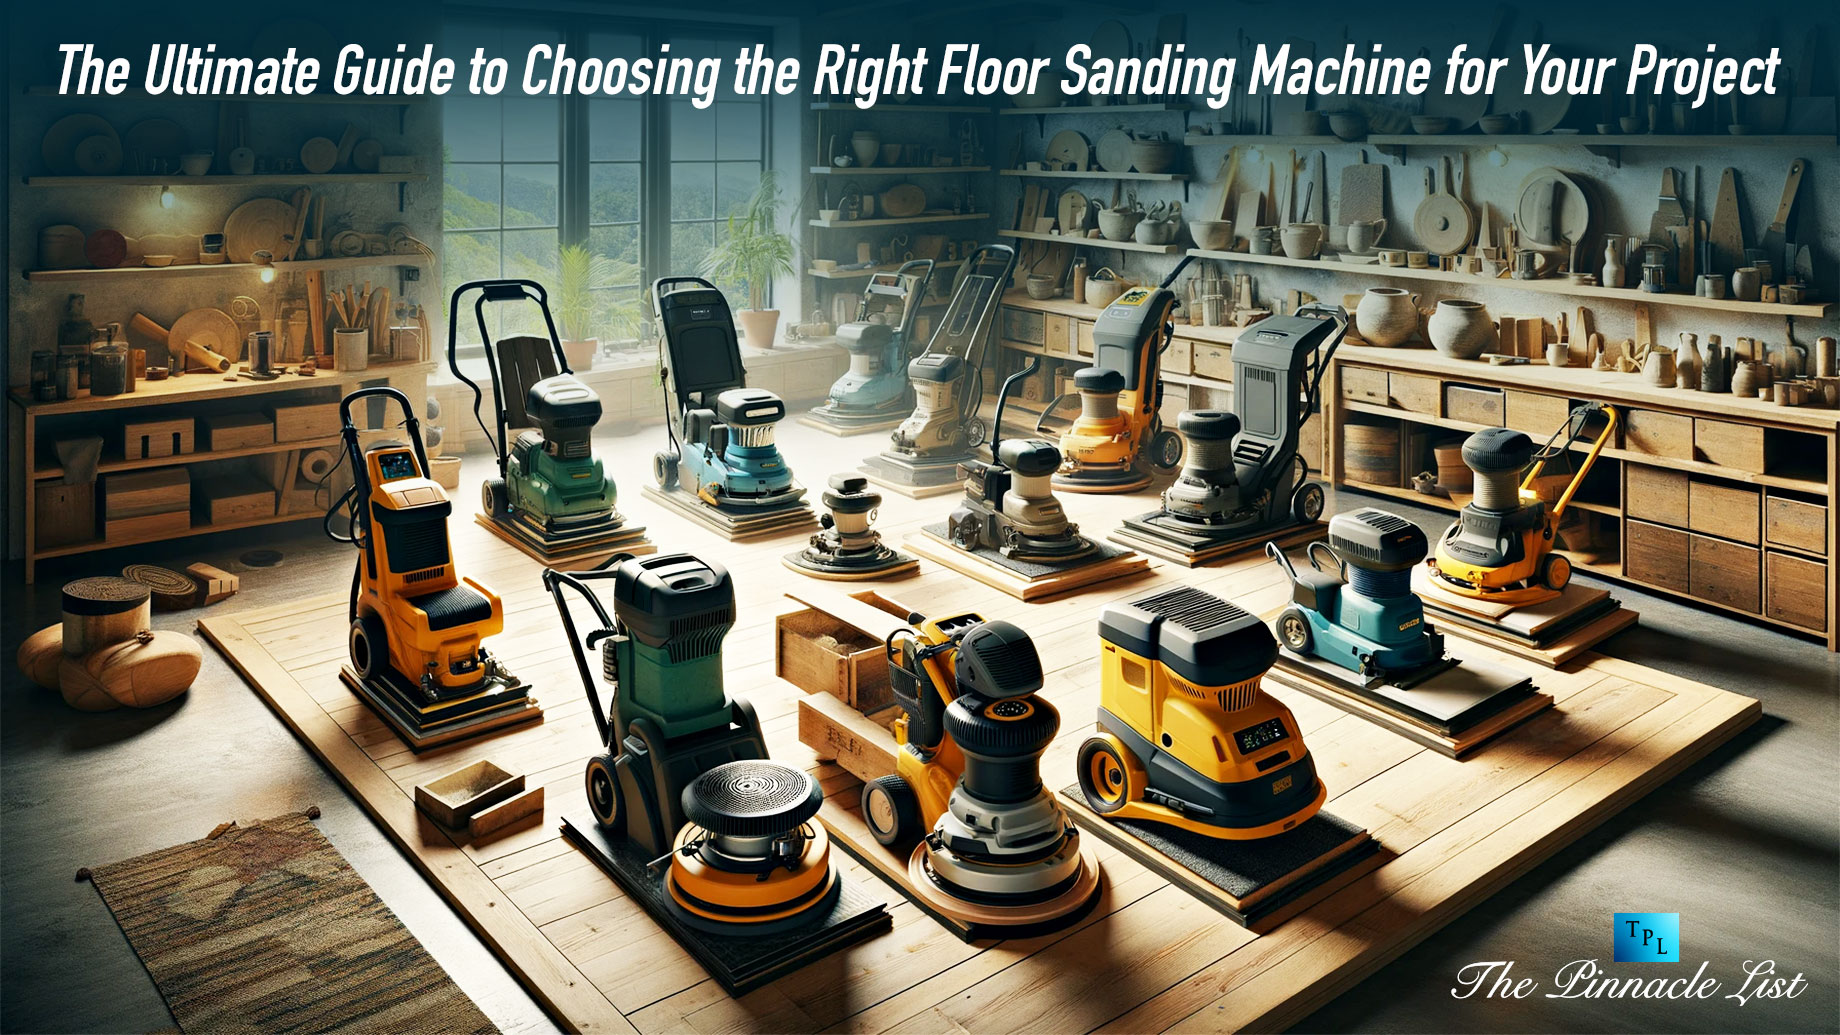 The Ultimate Guide to Choosing the Right Floor Sanding Machine for Your Project